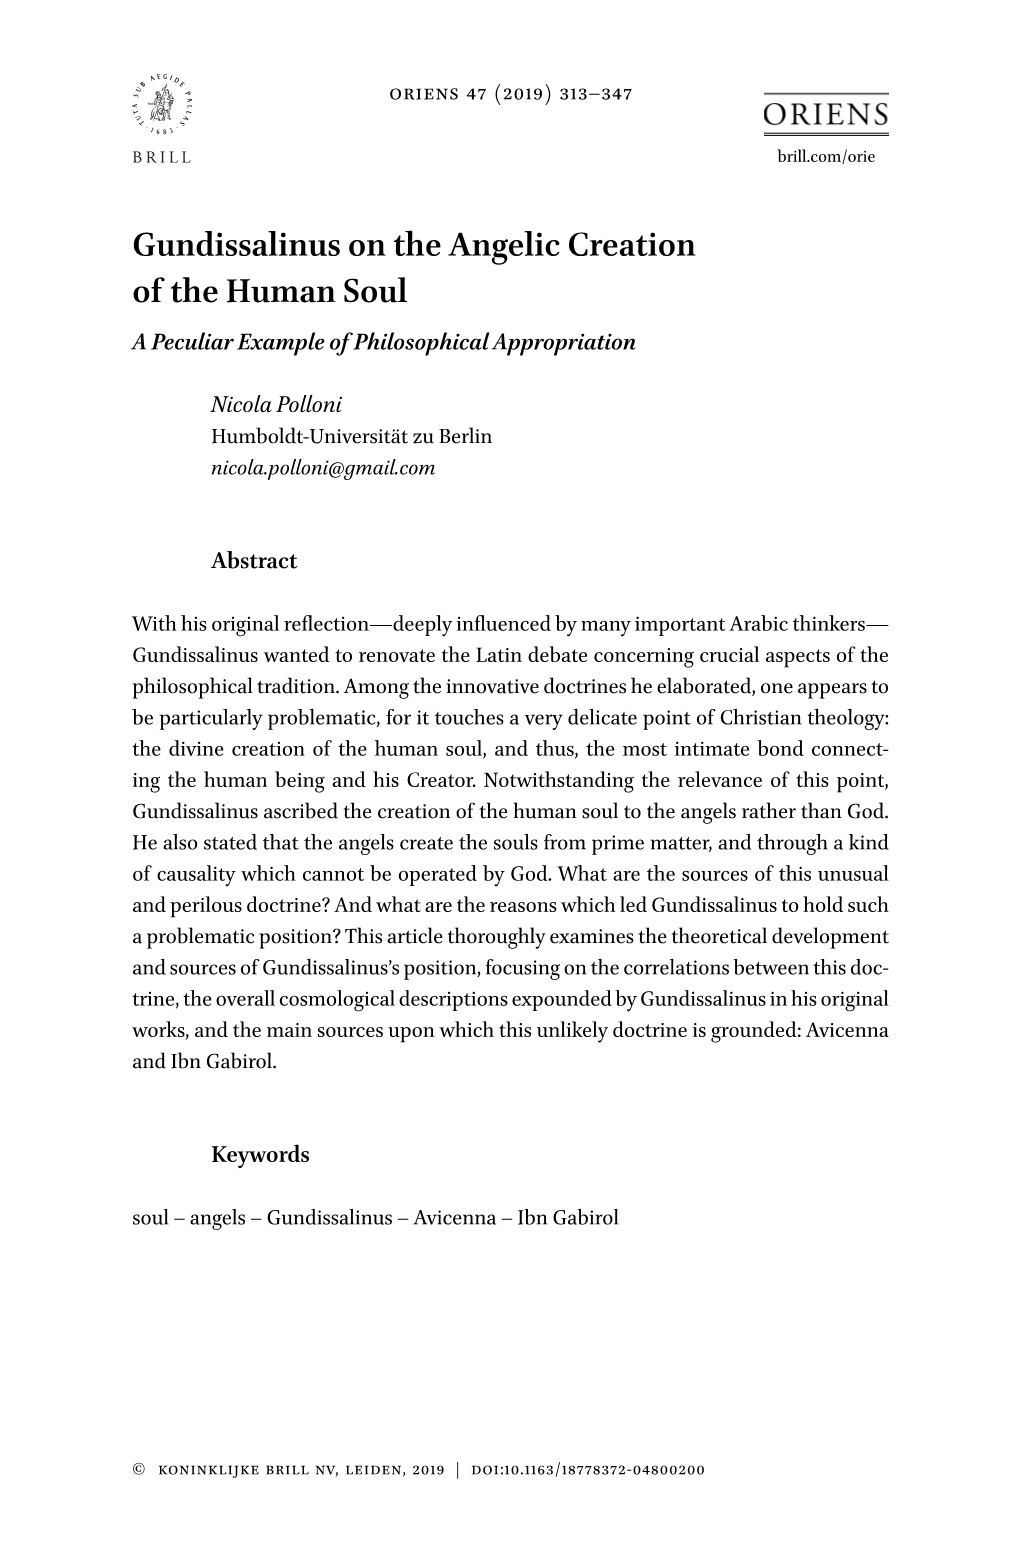 Gundissalinus on the Angelic Creation of the Human Soul a Peculiar Example of Philosophical Appropriation